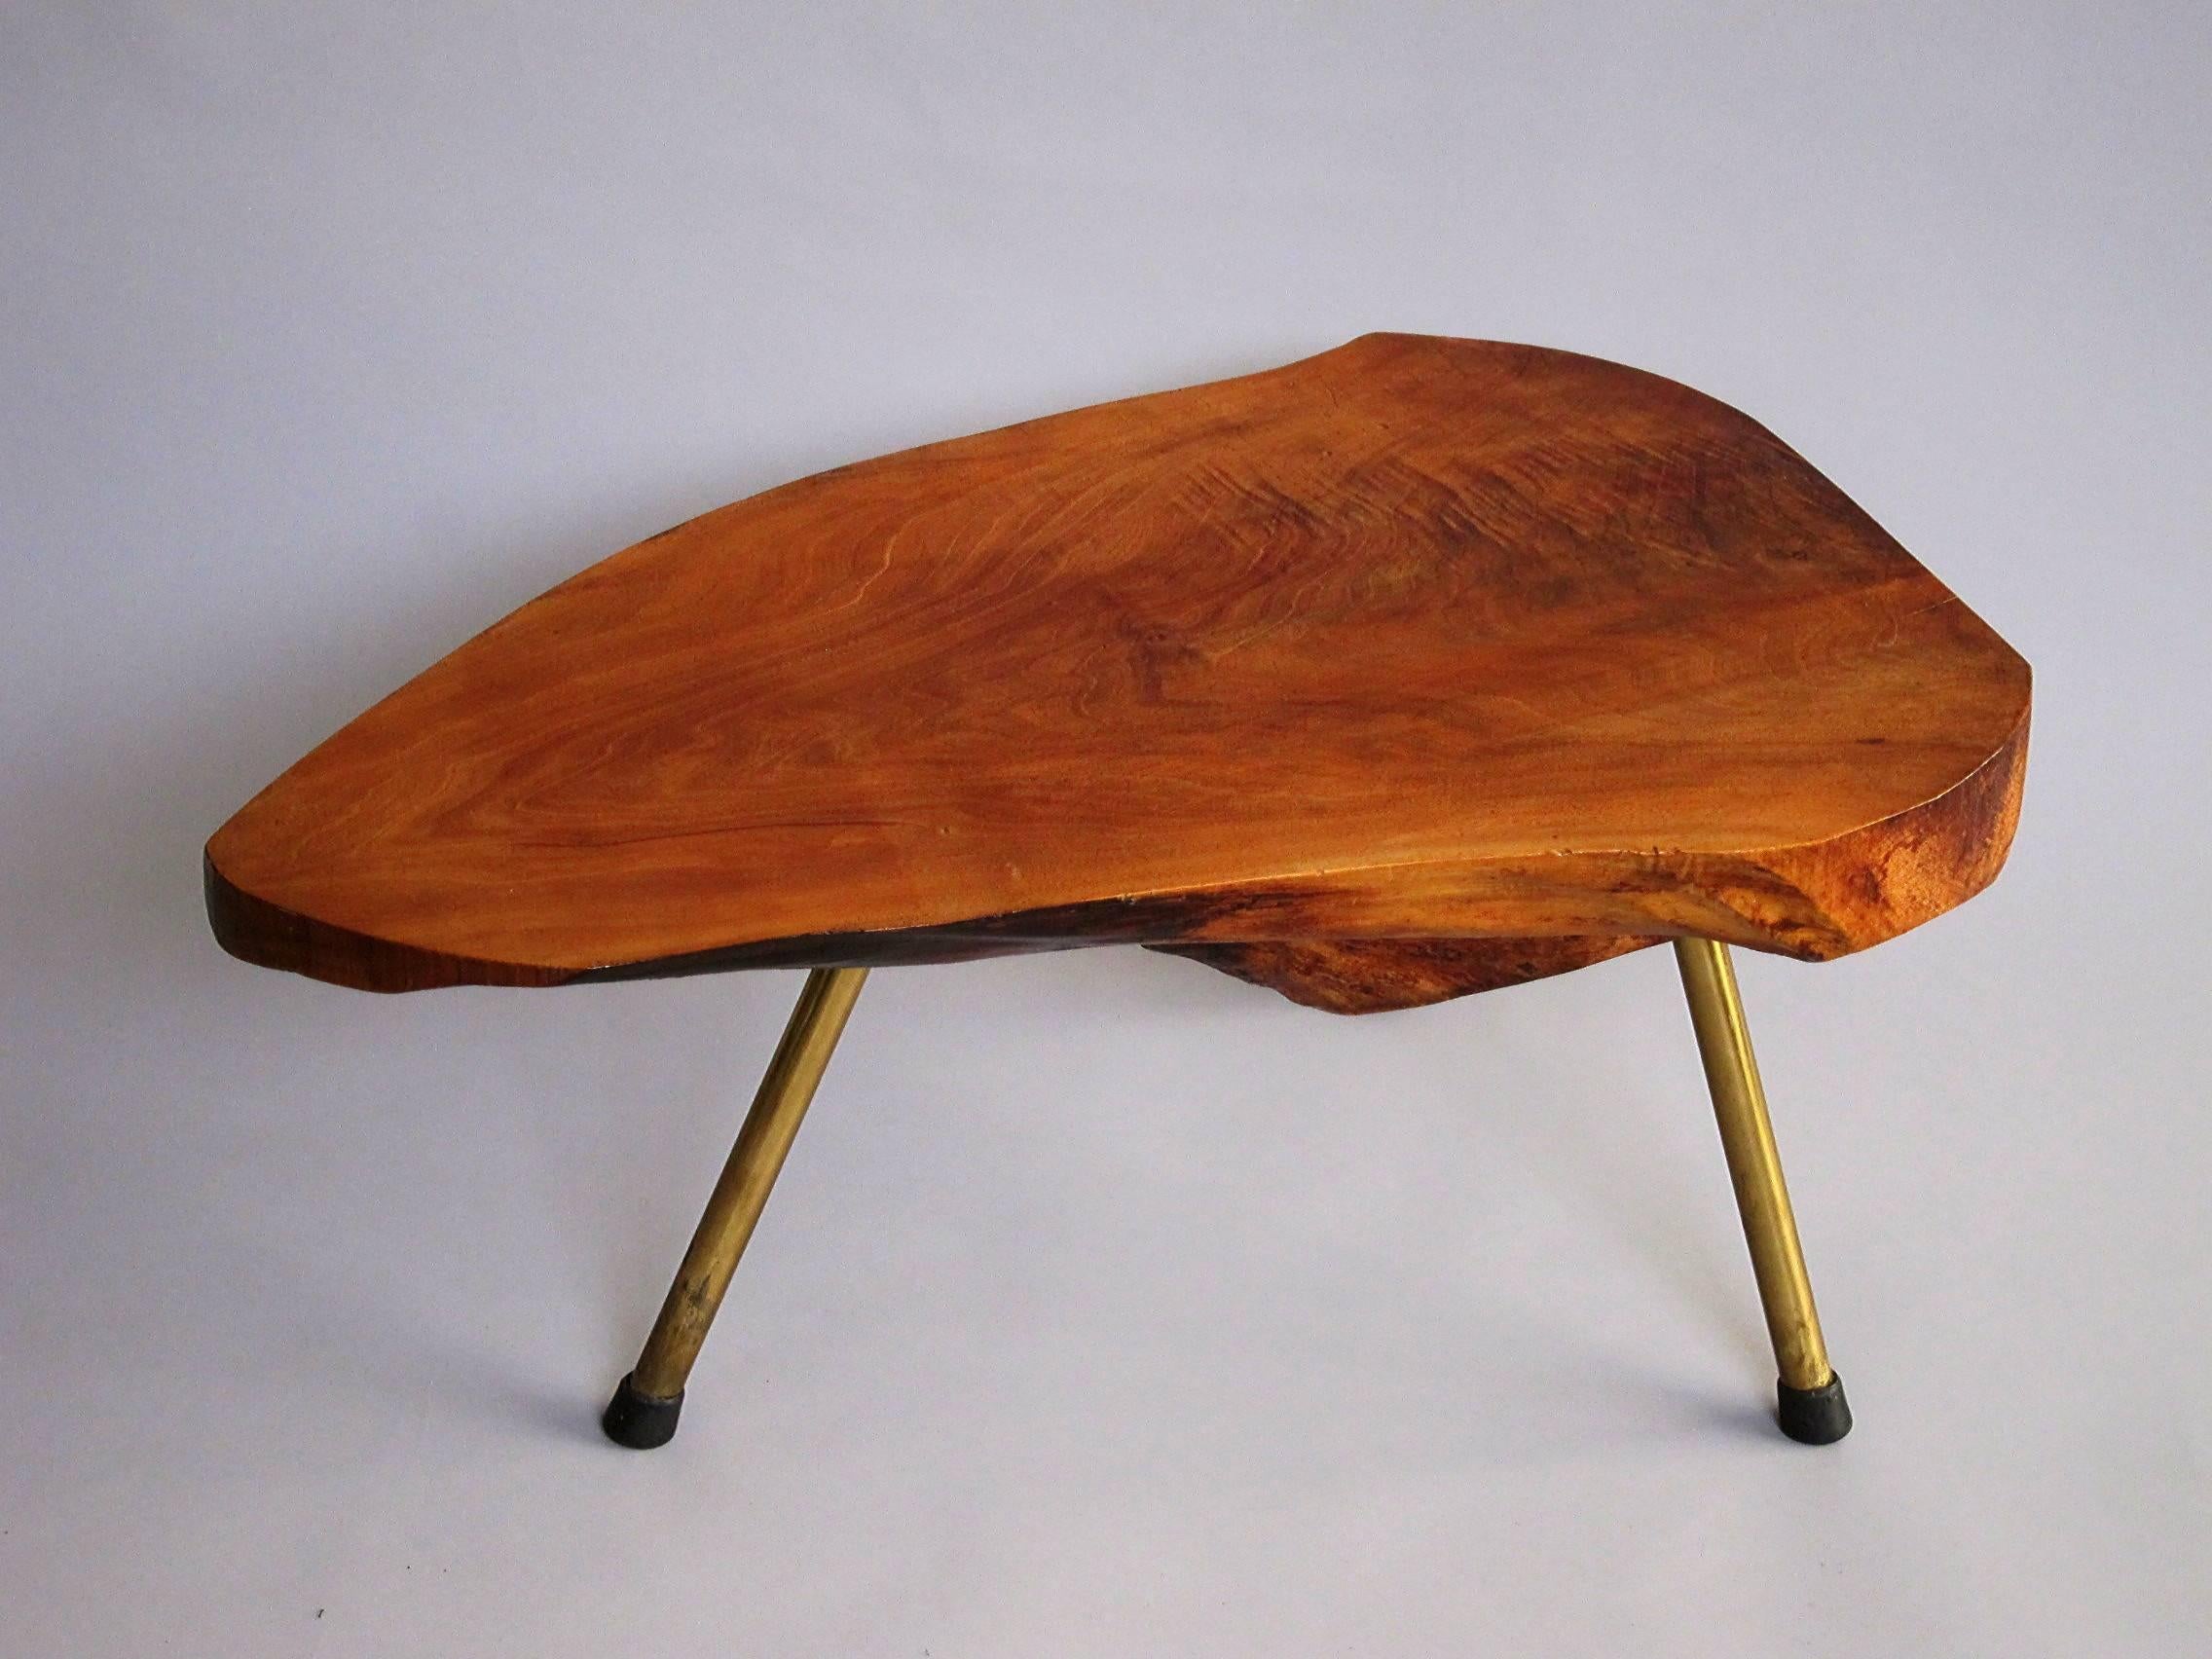 Beautiful wooden coffee table designed by Carl Auboeck and manufactured by Werstaette Carl Auböck Vienna, Austria in the 1950s.